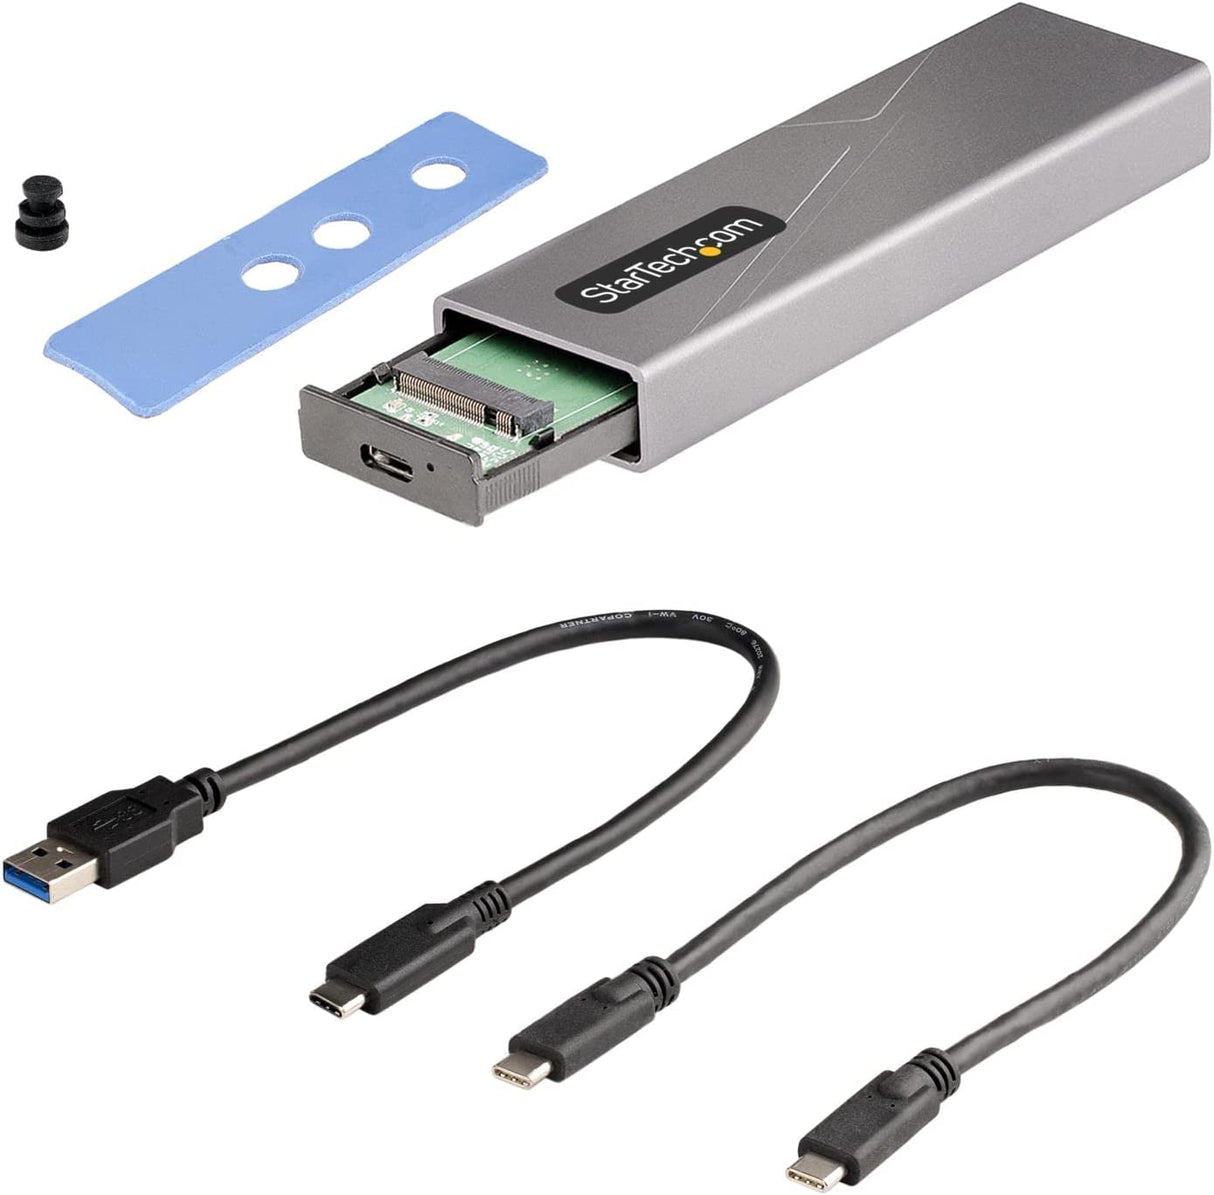 StarTech.com USB-C 10Gbps to M.2 NVMe or M.2 SATA SSD Enclosure - Tool-free External M.2 PCIe/SATA NGFF SSD Aluminum Case - USB Type-C&amp;A Host Cables - Supports 2230/2242/2260/2280 (M2-USB-C-NVME-SATA)